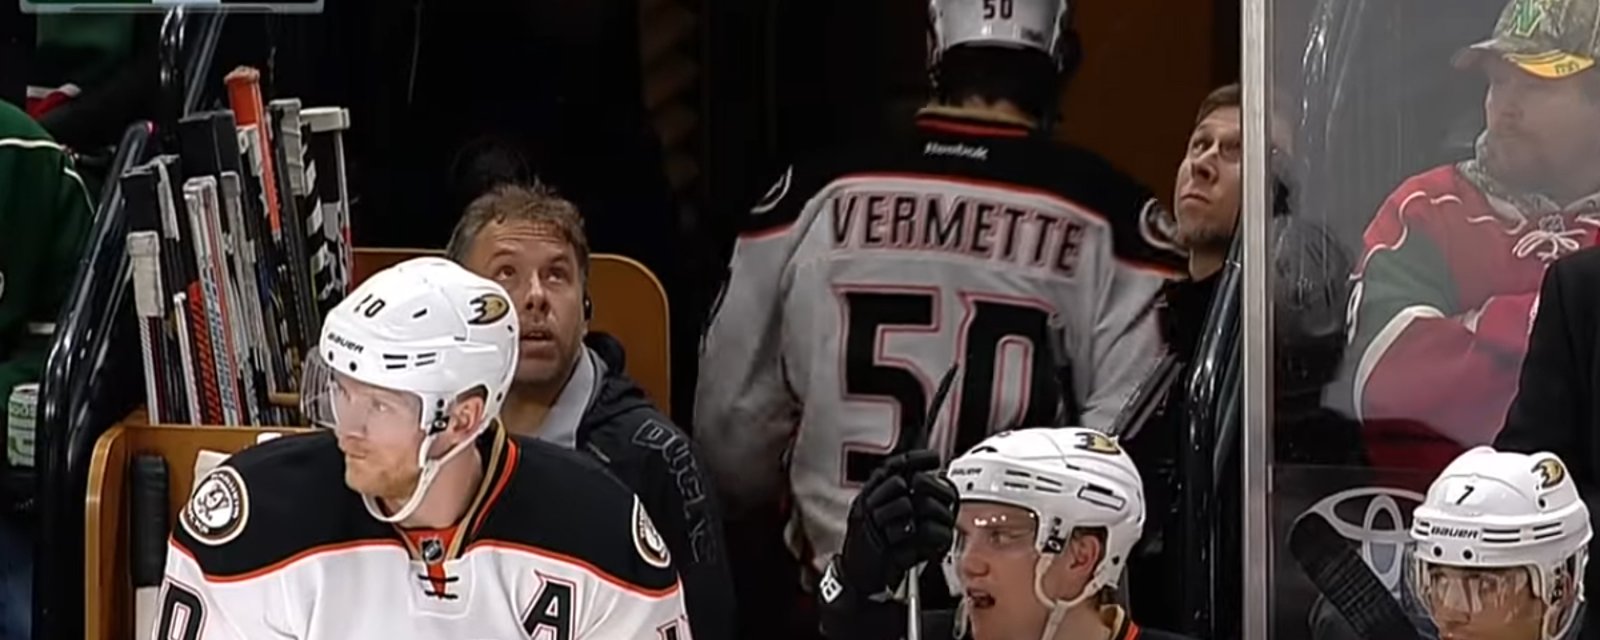 Must See: Antoine Vermette thrown out of the game for Abuse of Officials!